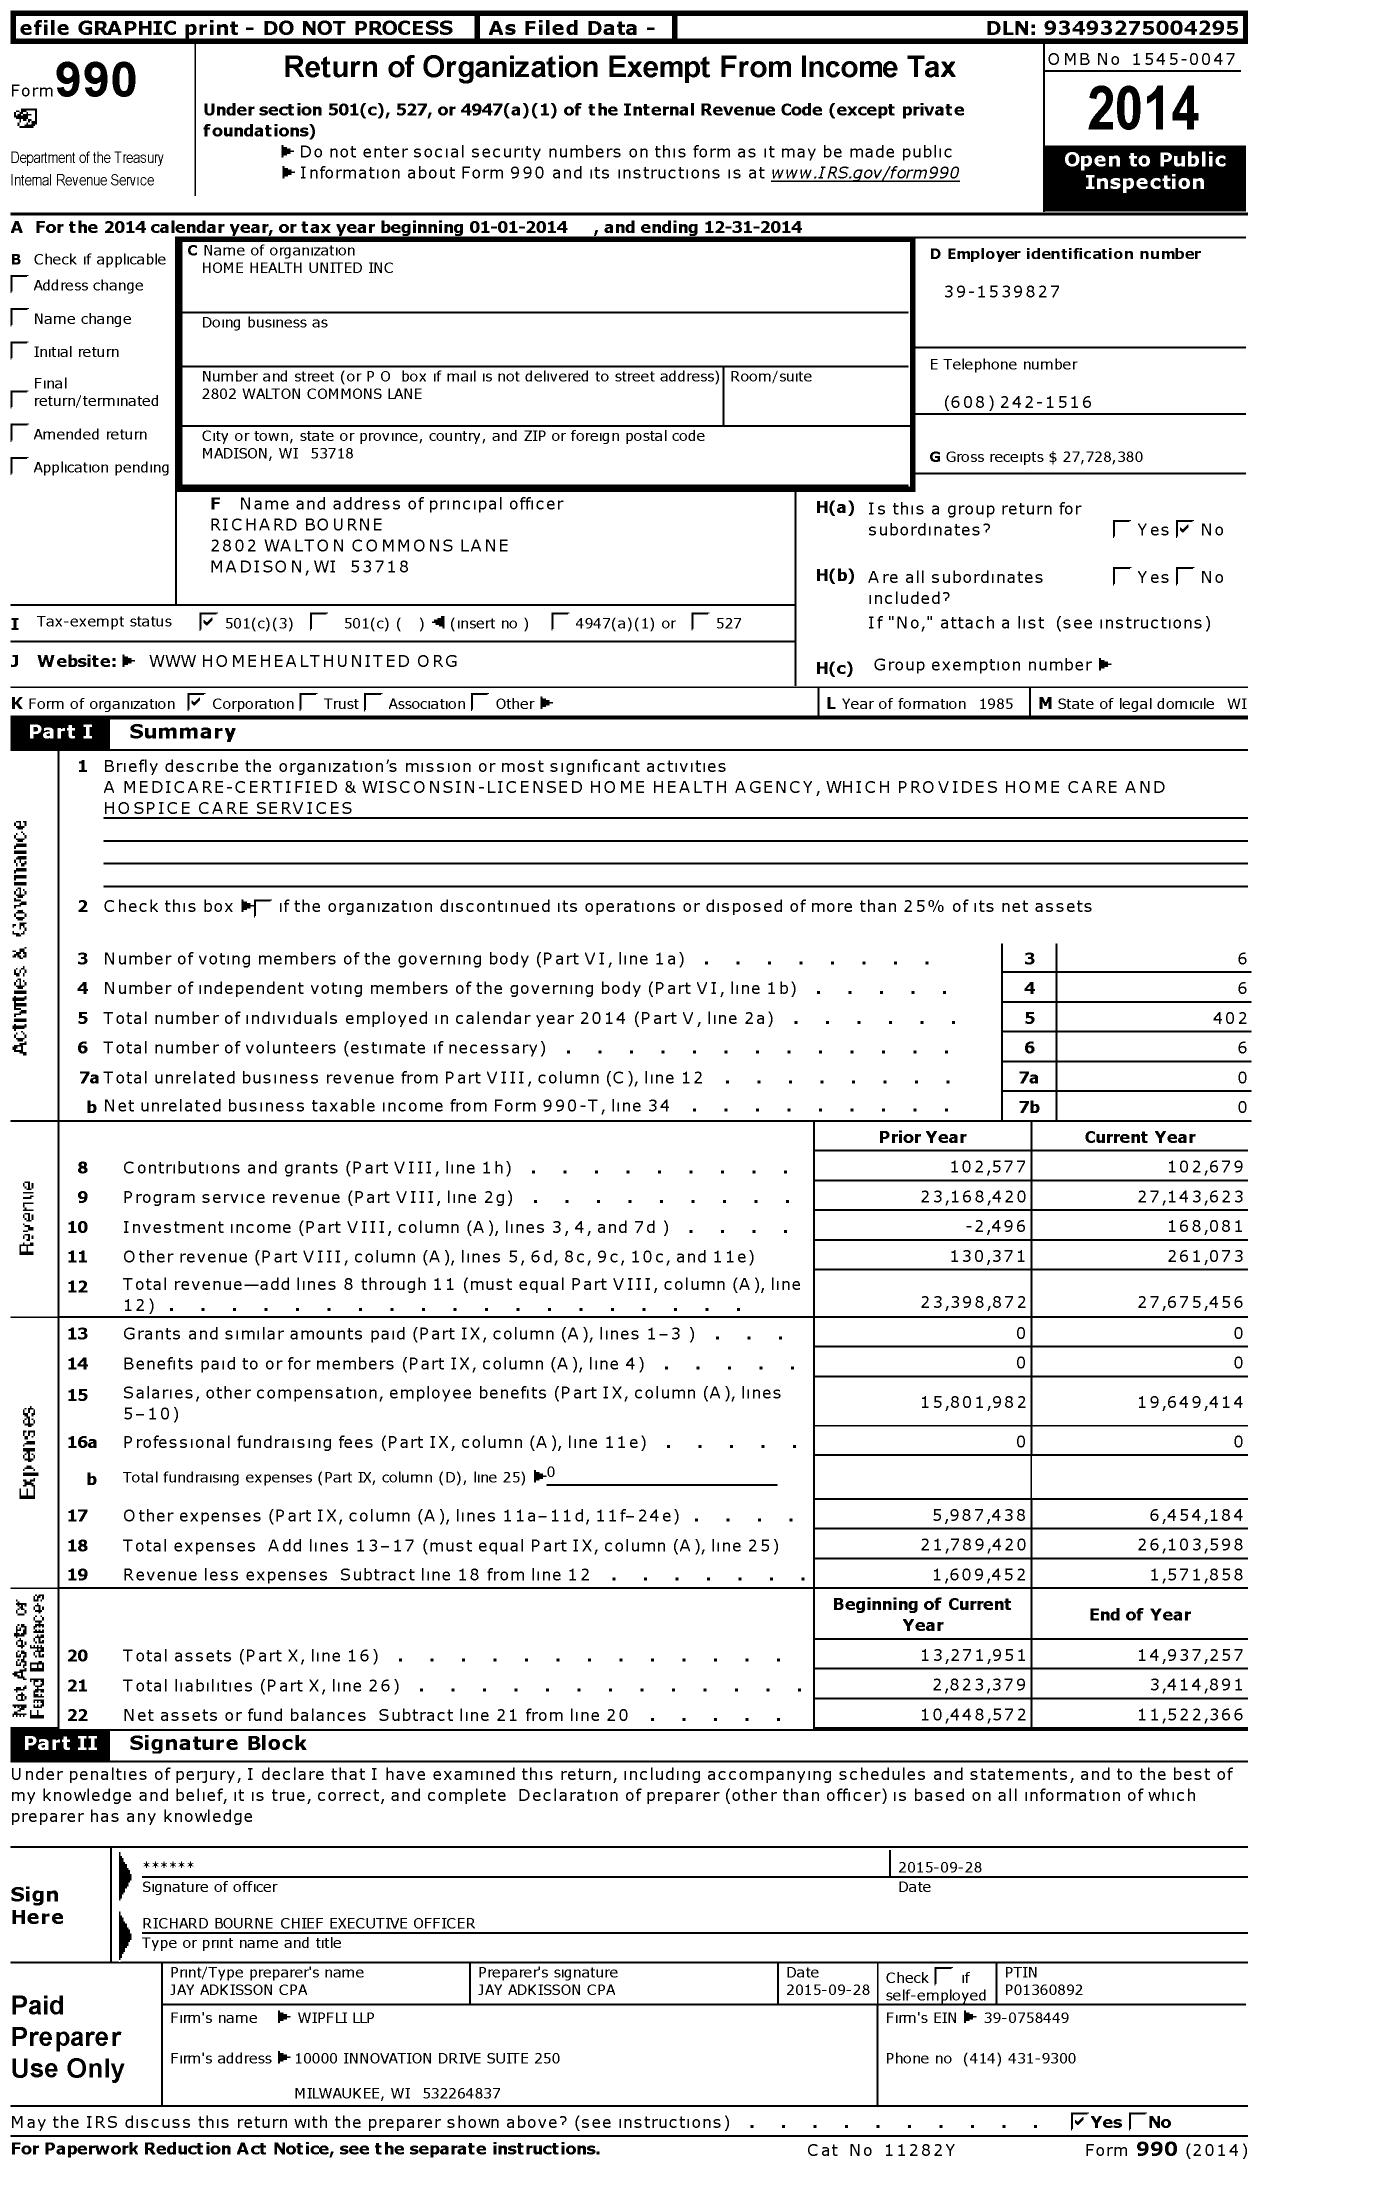 Image of first page of 2014 Form 990 for Home Health United (HHU)